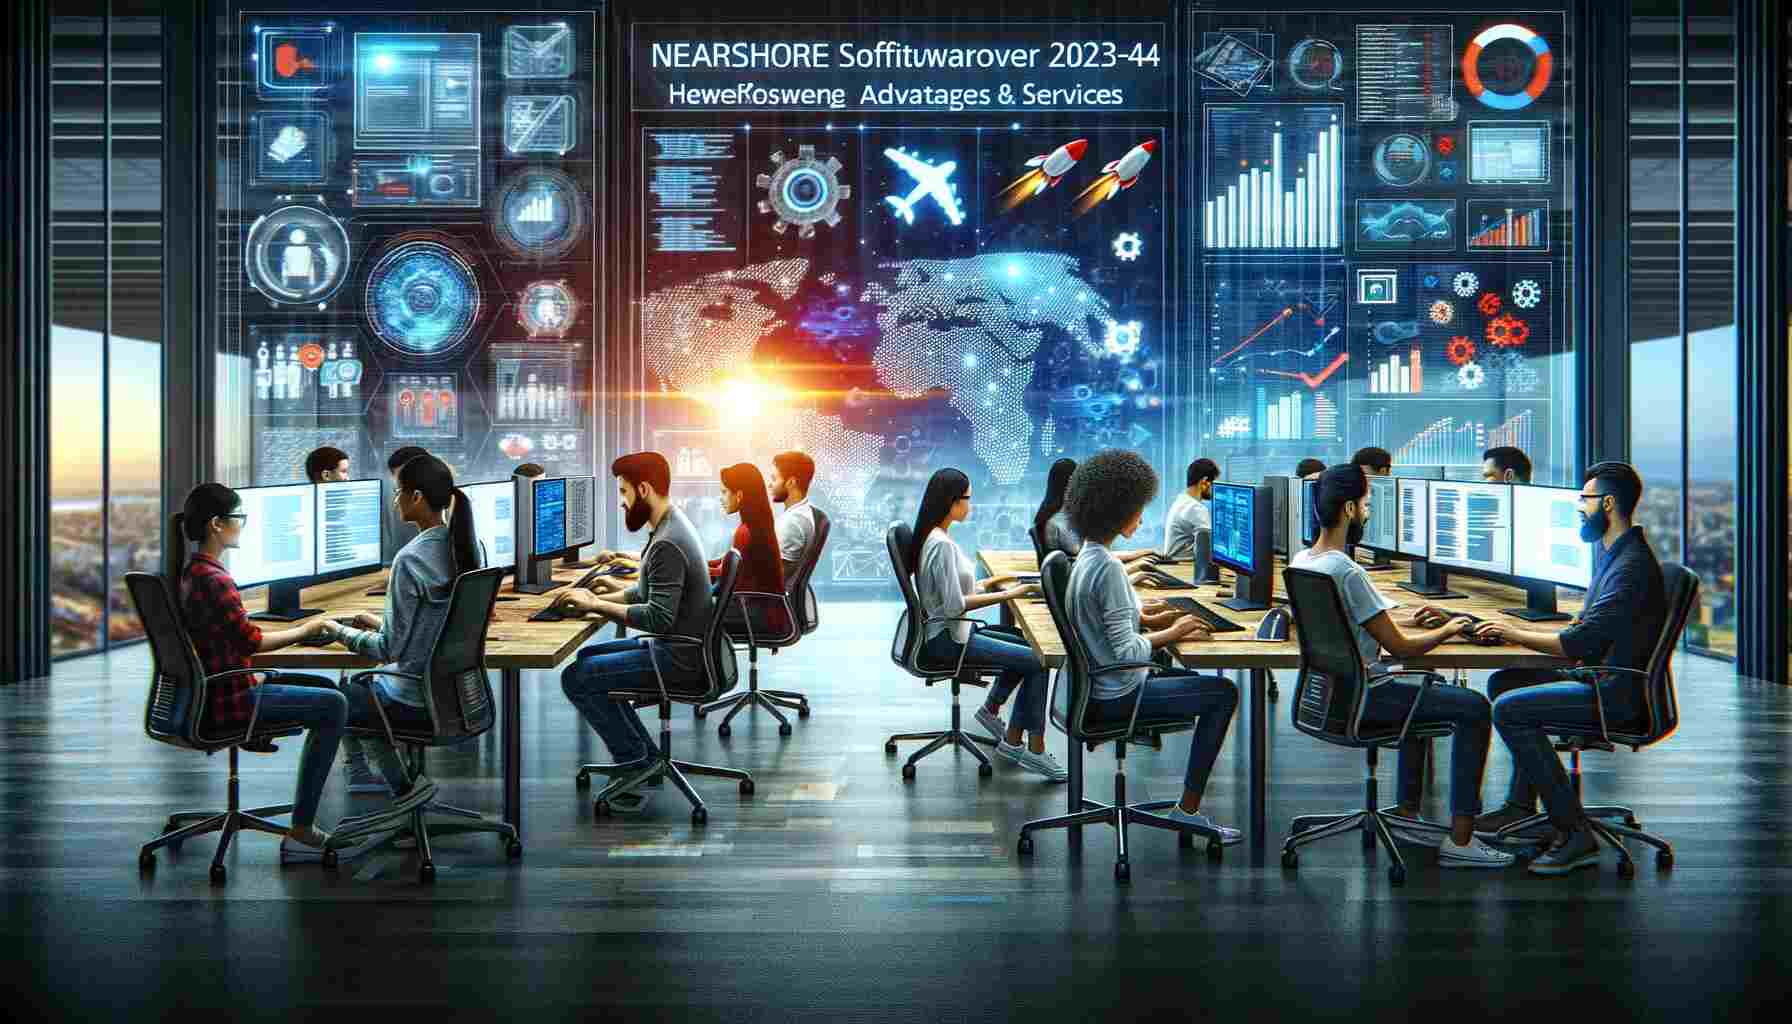 Looking for nearshore software developers? Discover the advantages and services offered by top companies in 2023-24. Find out more now!